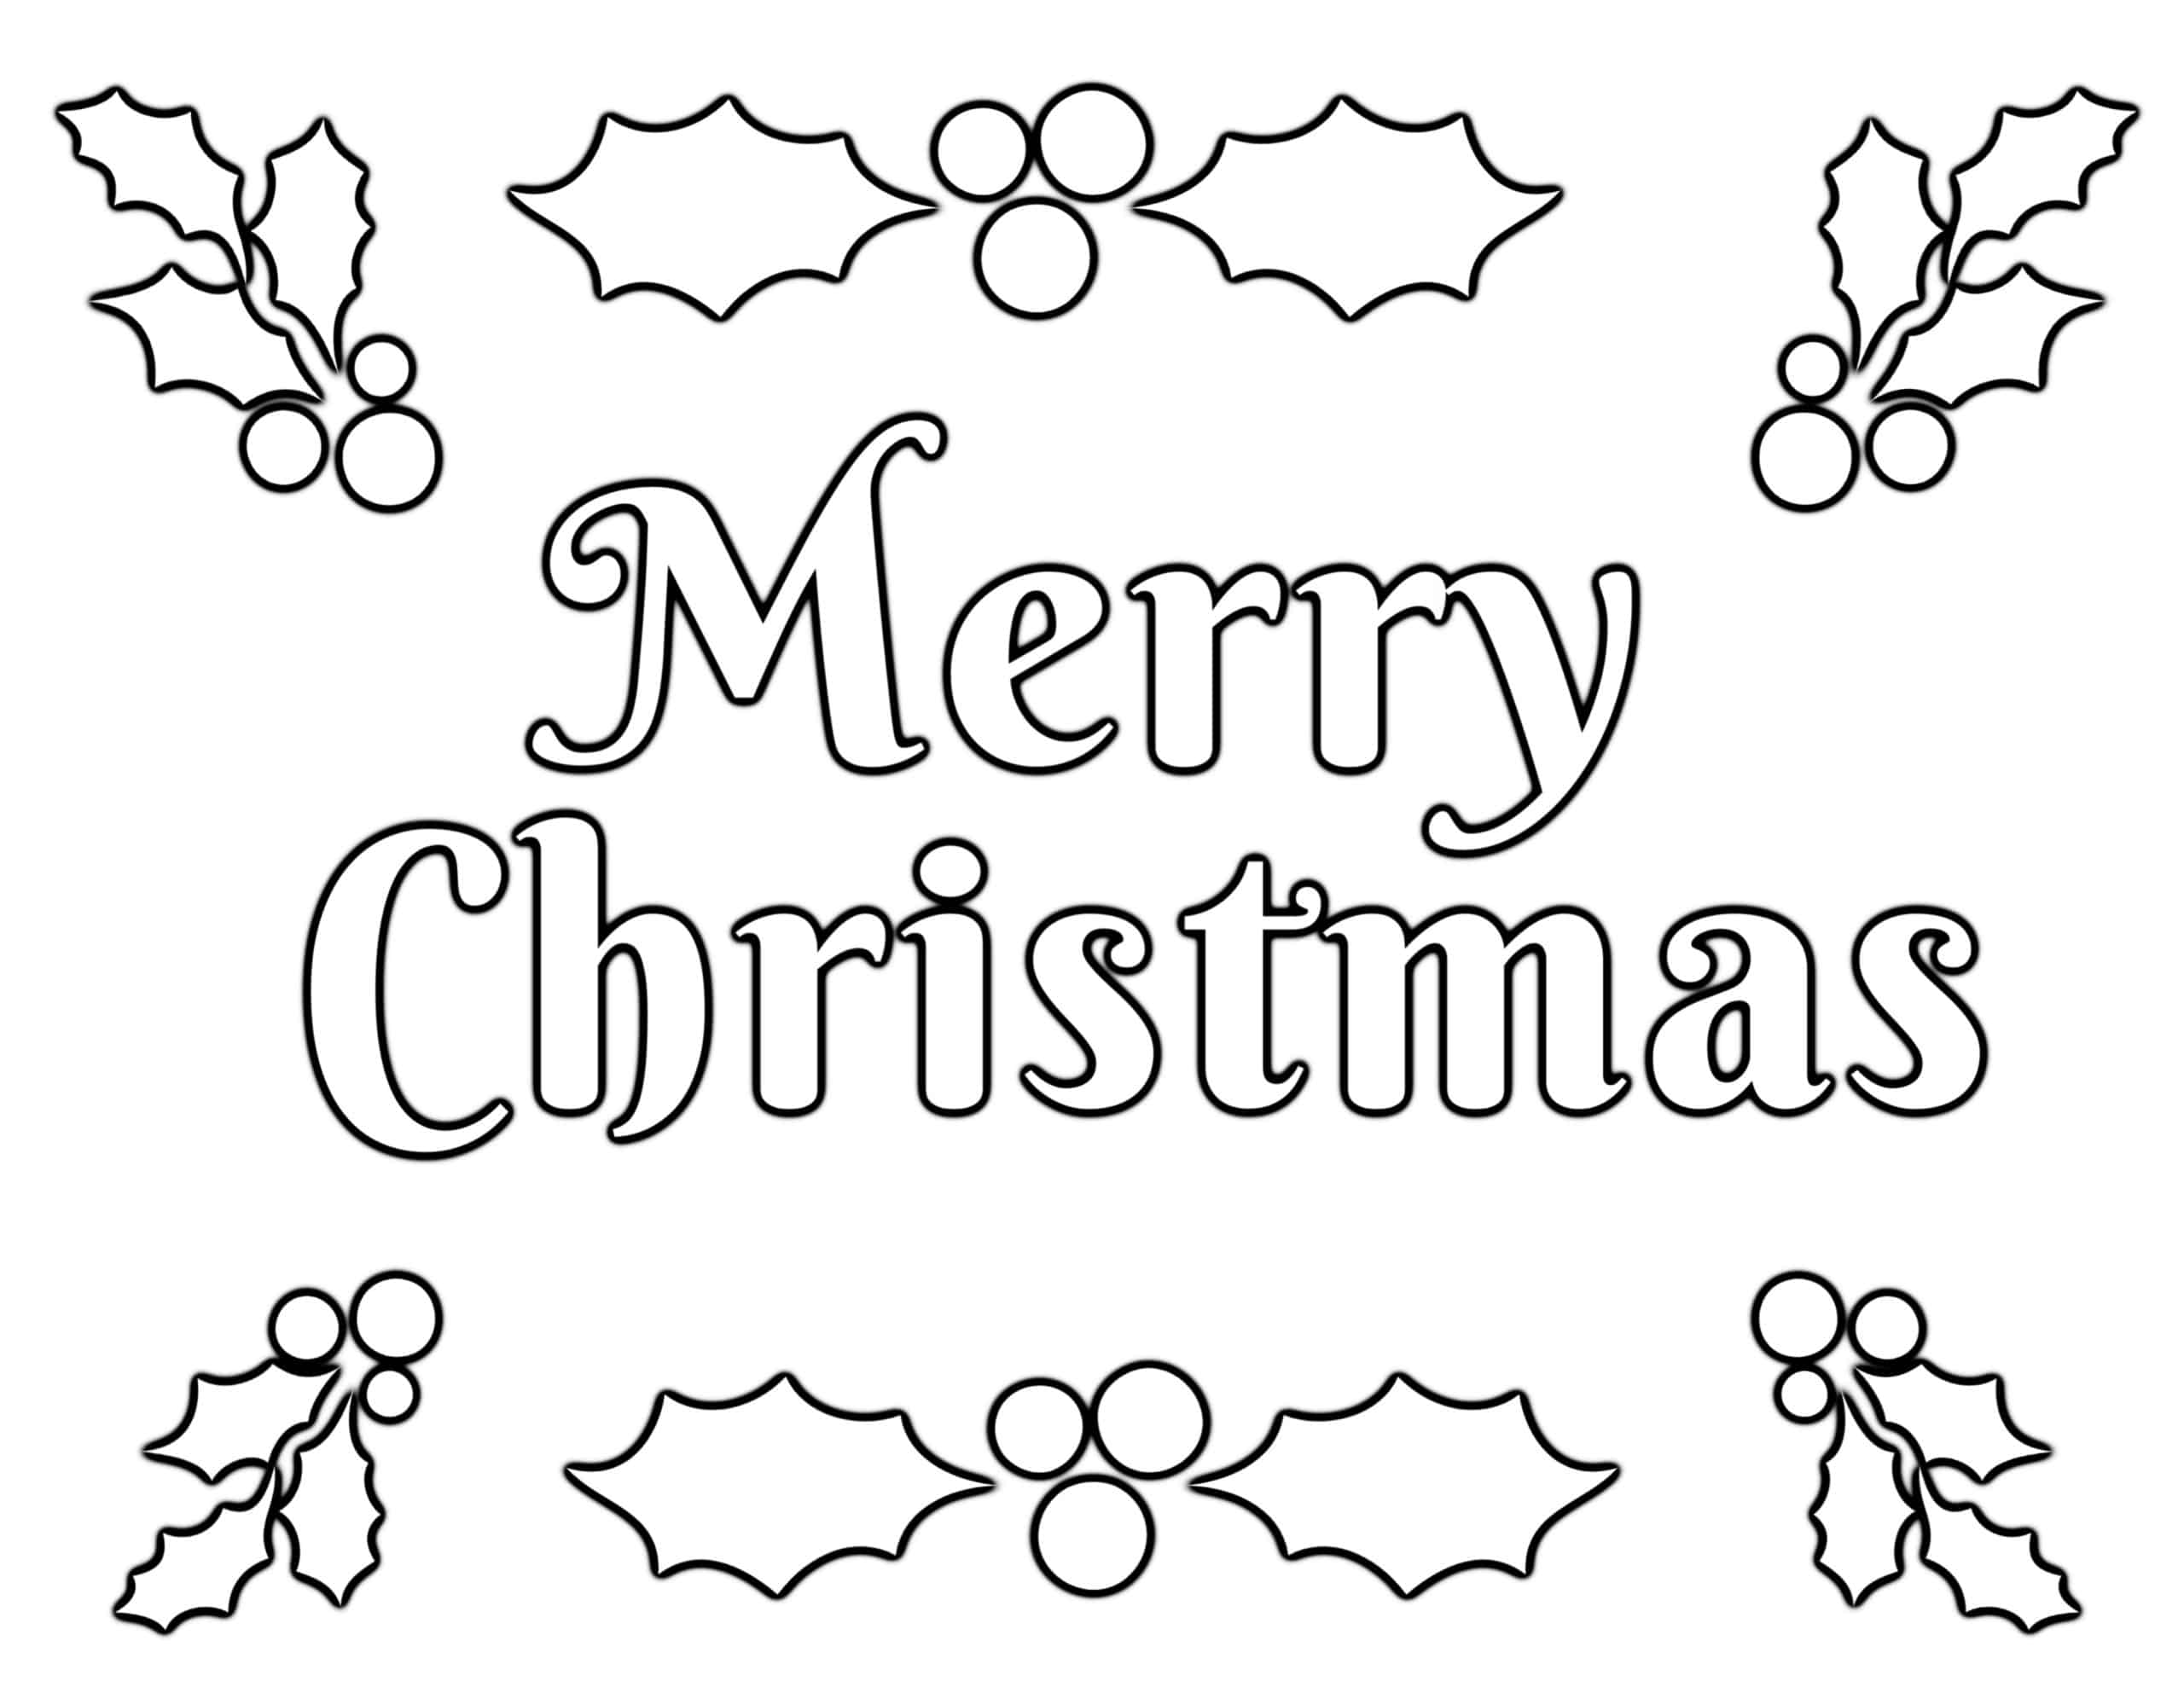 Christmas Coloring Pages for Kids 20 FREE Easy Printable PDF